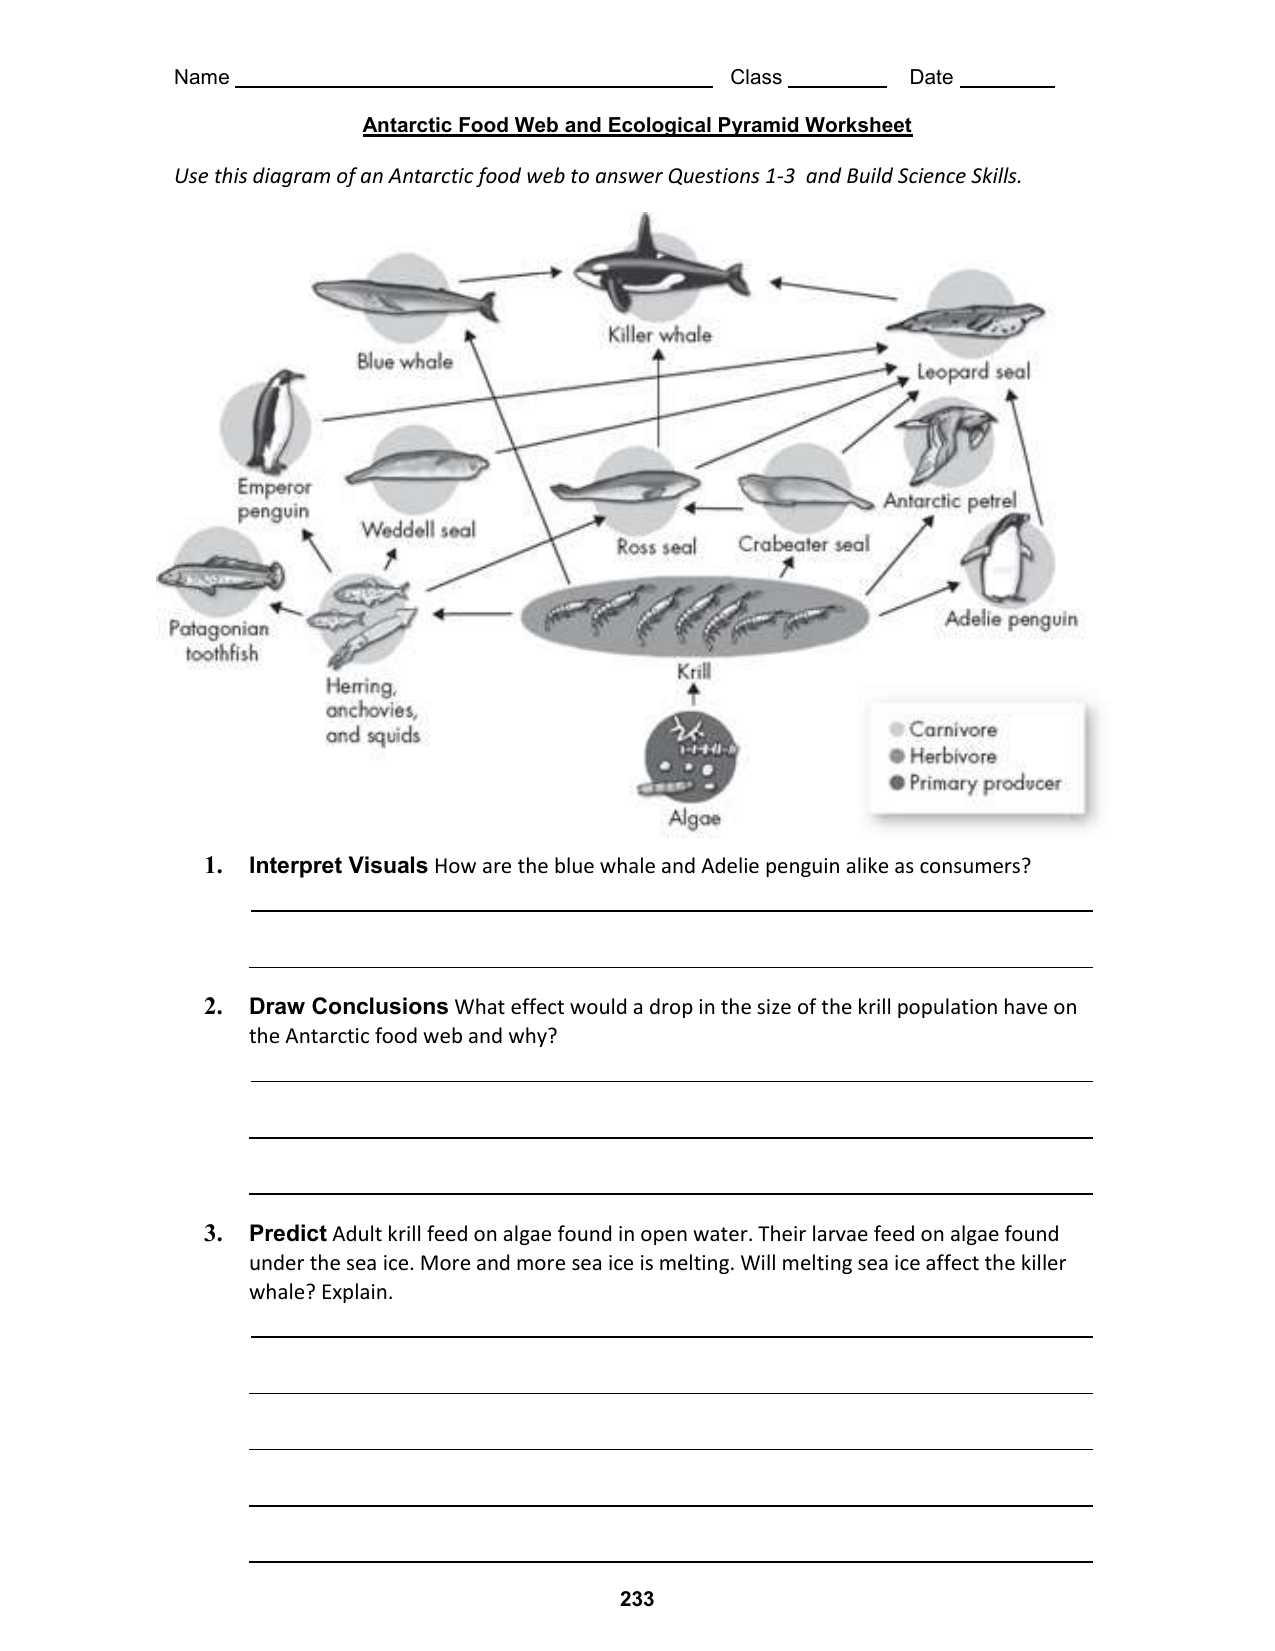 Food Web Worksheet Answers Also Ecological Pyramids Worksheet Answers Image Collections Worksheet